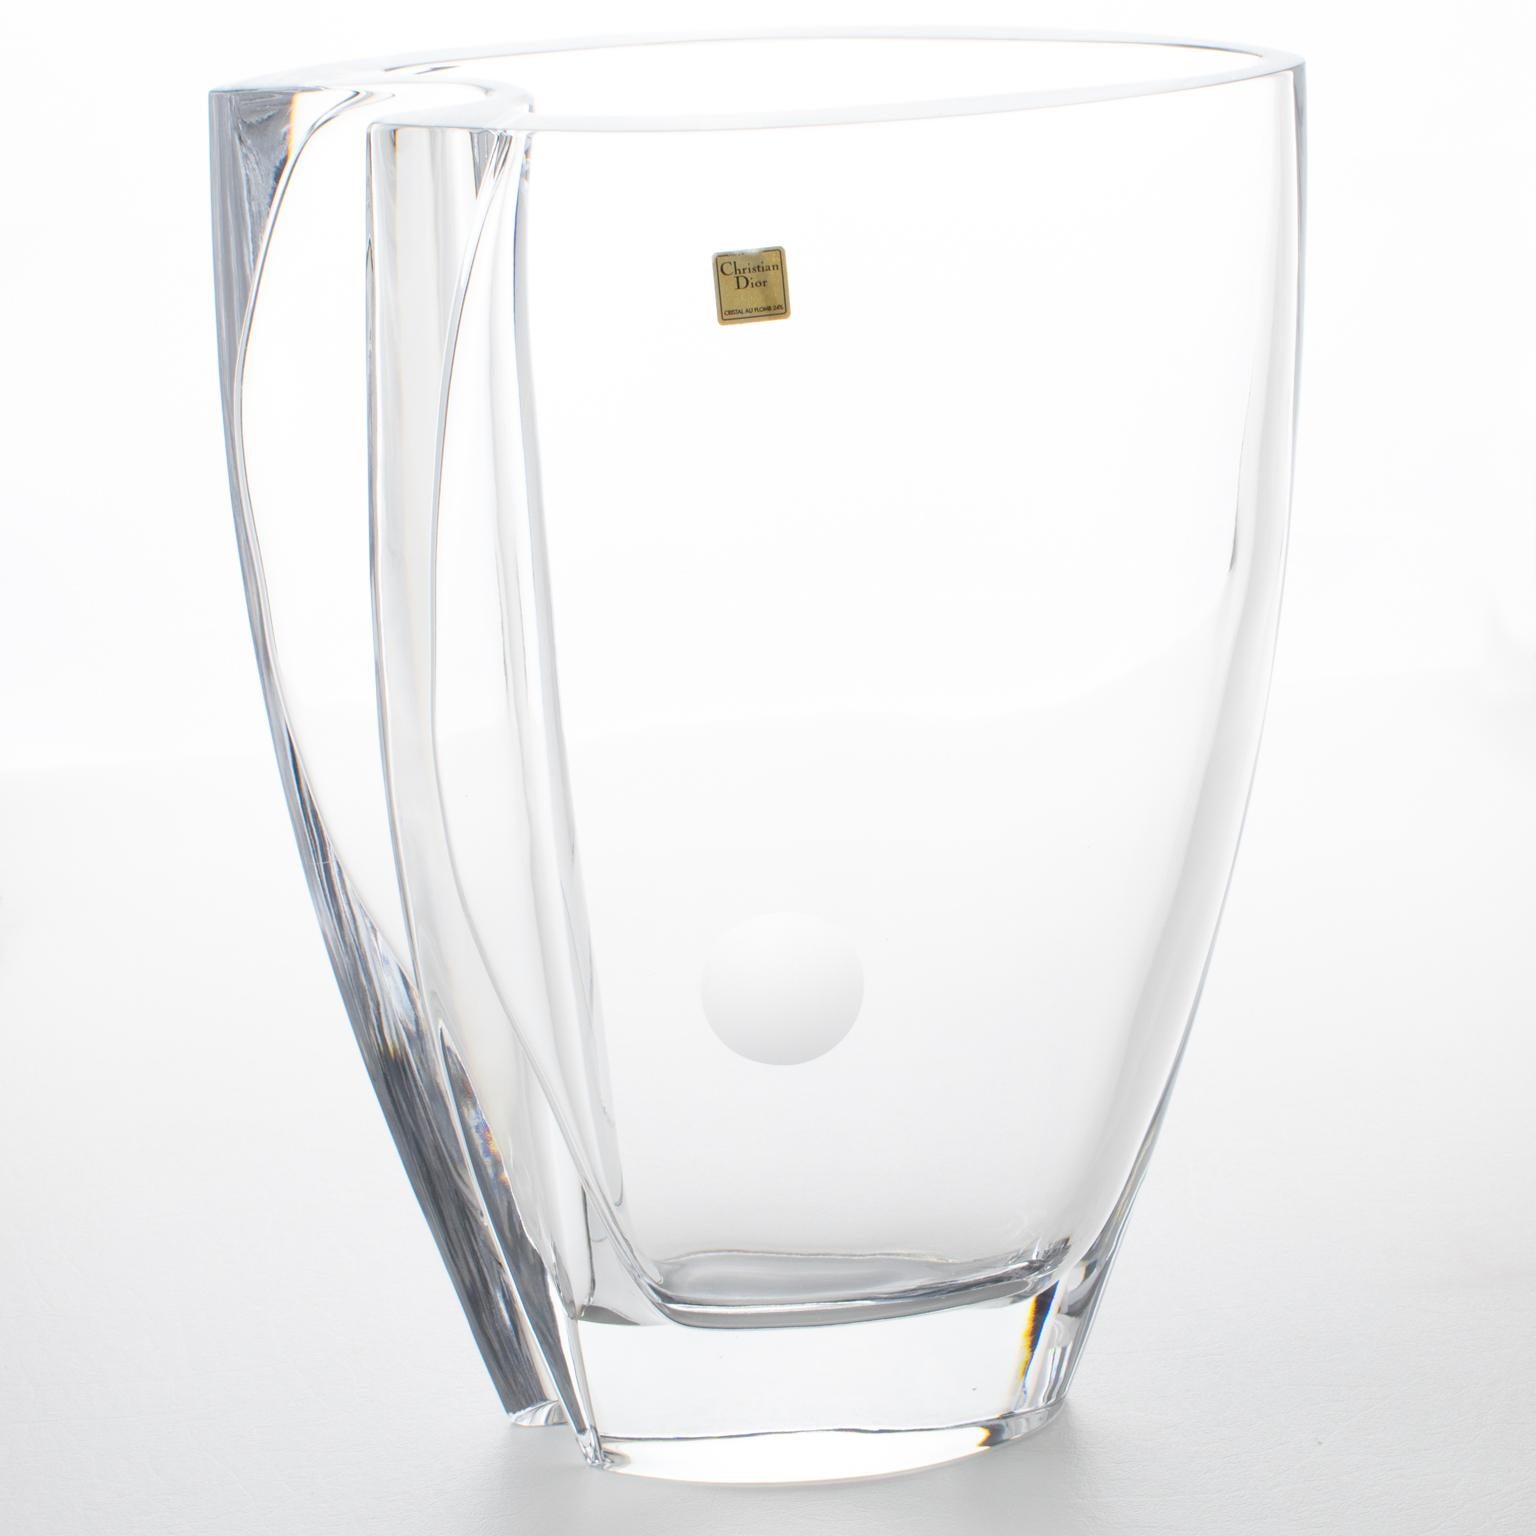 This superb crystal vase was designed for the Christian Dior Home Collection in Italy in the 1980s. The monumental glass art piece has a smooth, streamlined, minimalist, wavy shape with a frosted etched dot on one side. The vase is heavy and sturdy